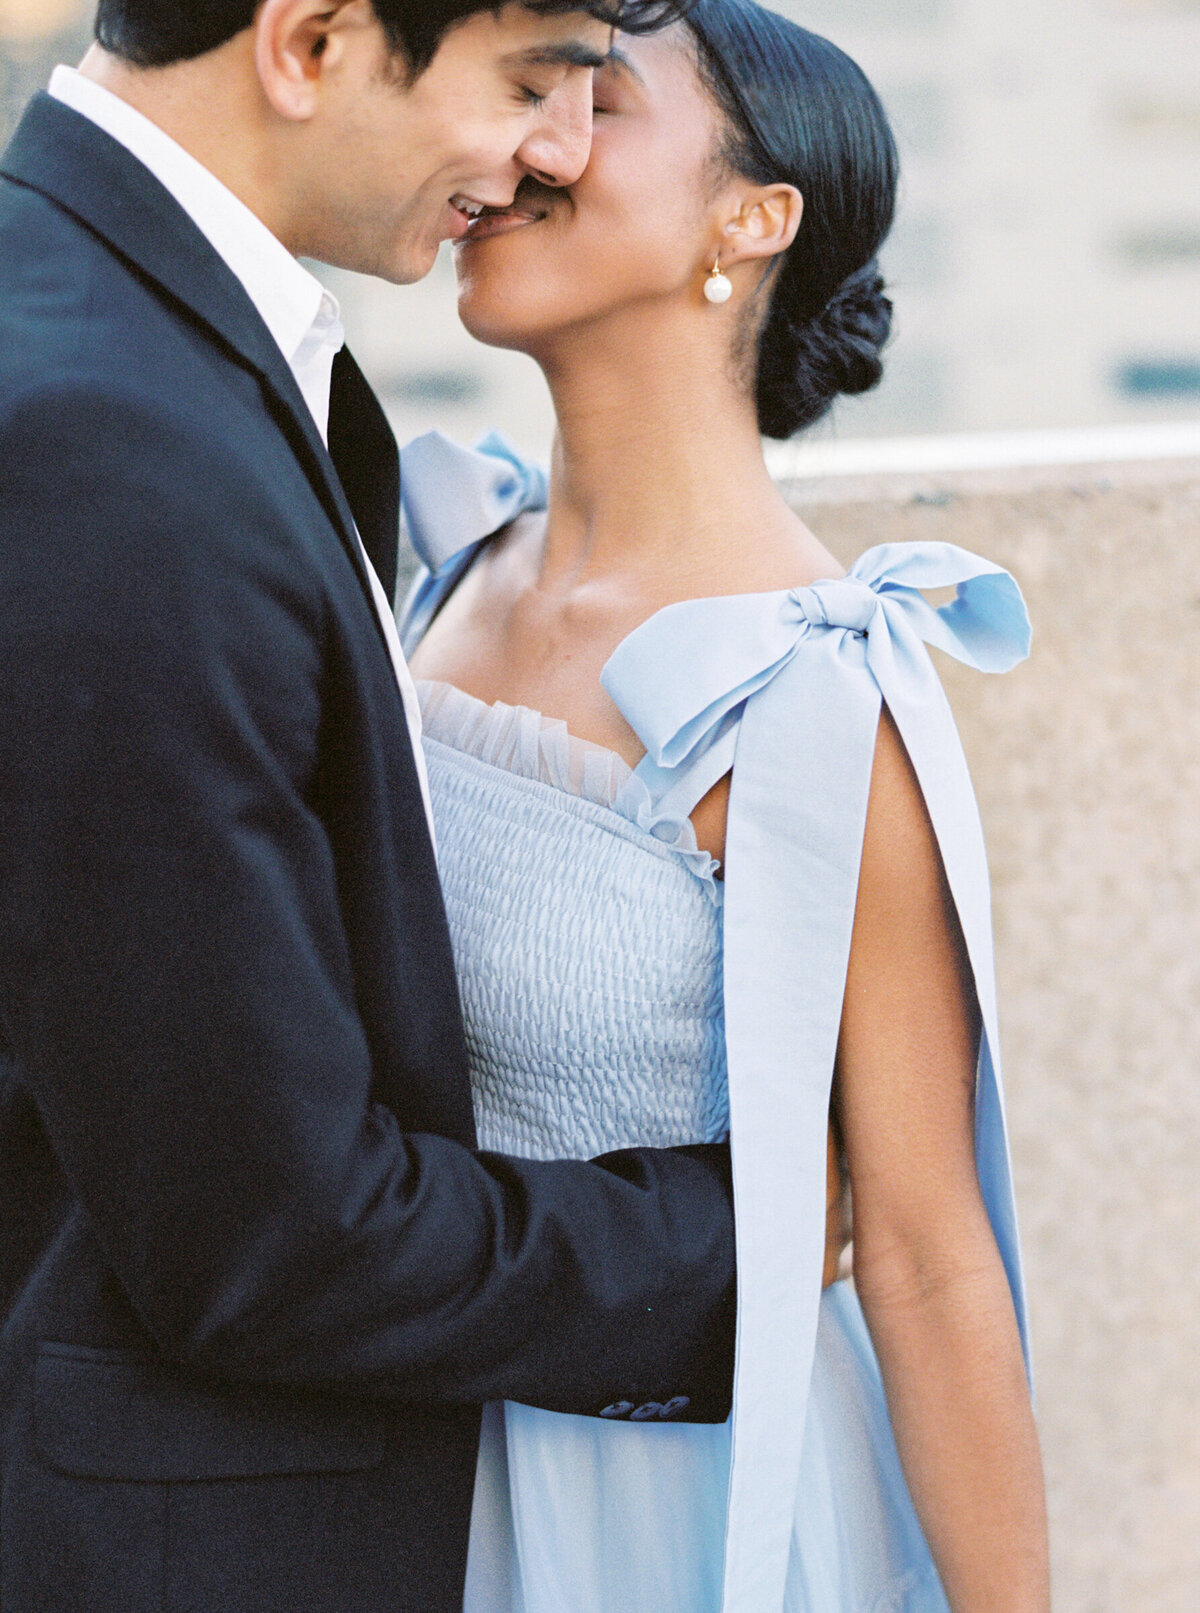 downtown_denver_engagement_mary_ann_craddock_photography_0014